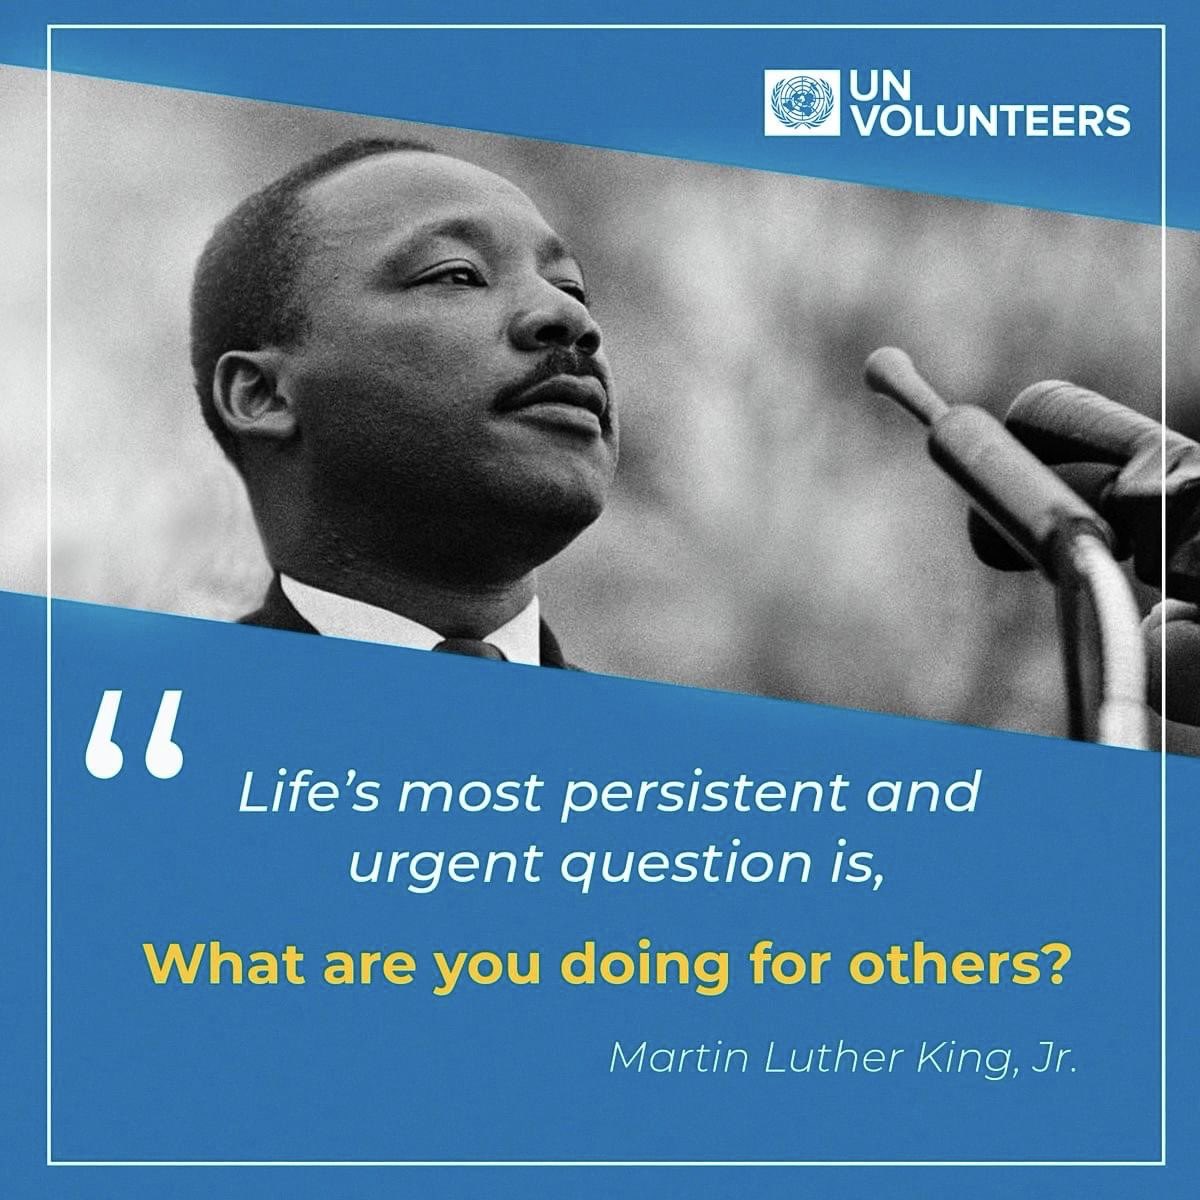 “Life’s most persistent and urgent question is 
What are you doing for others? “
Well, why not consider volunteering with Soroptimist  Bristol? 
We are women like you, working with other women to improve the lives of women & girls.
Join us. @SIGBI1 #SoroptimistBristol #Volunteer